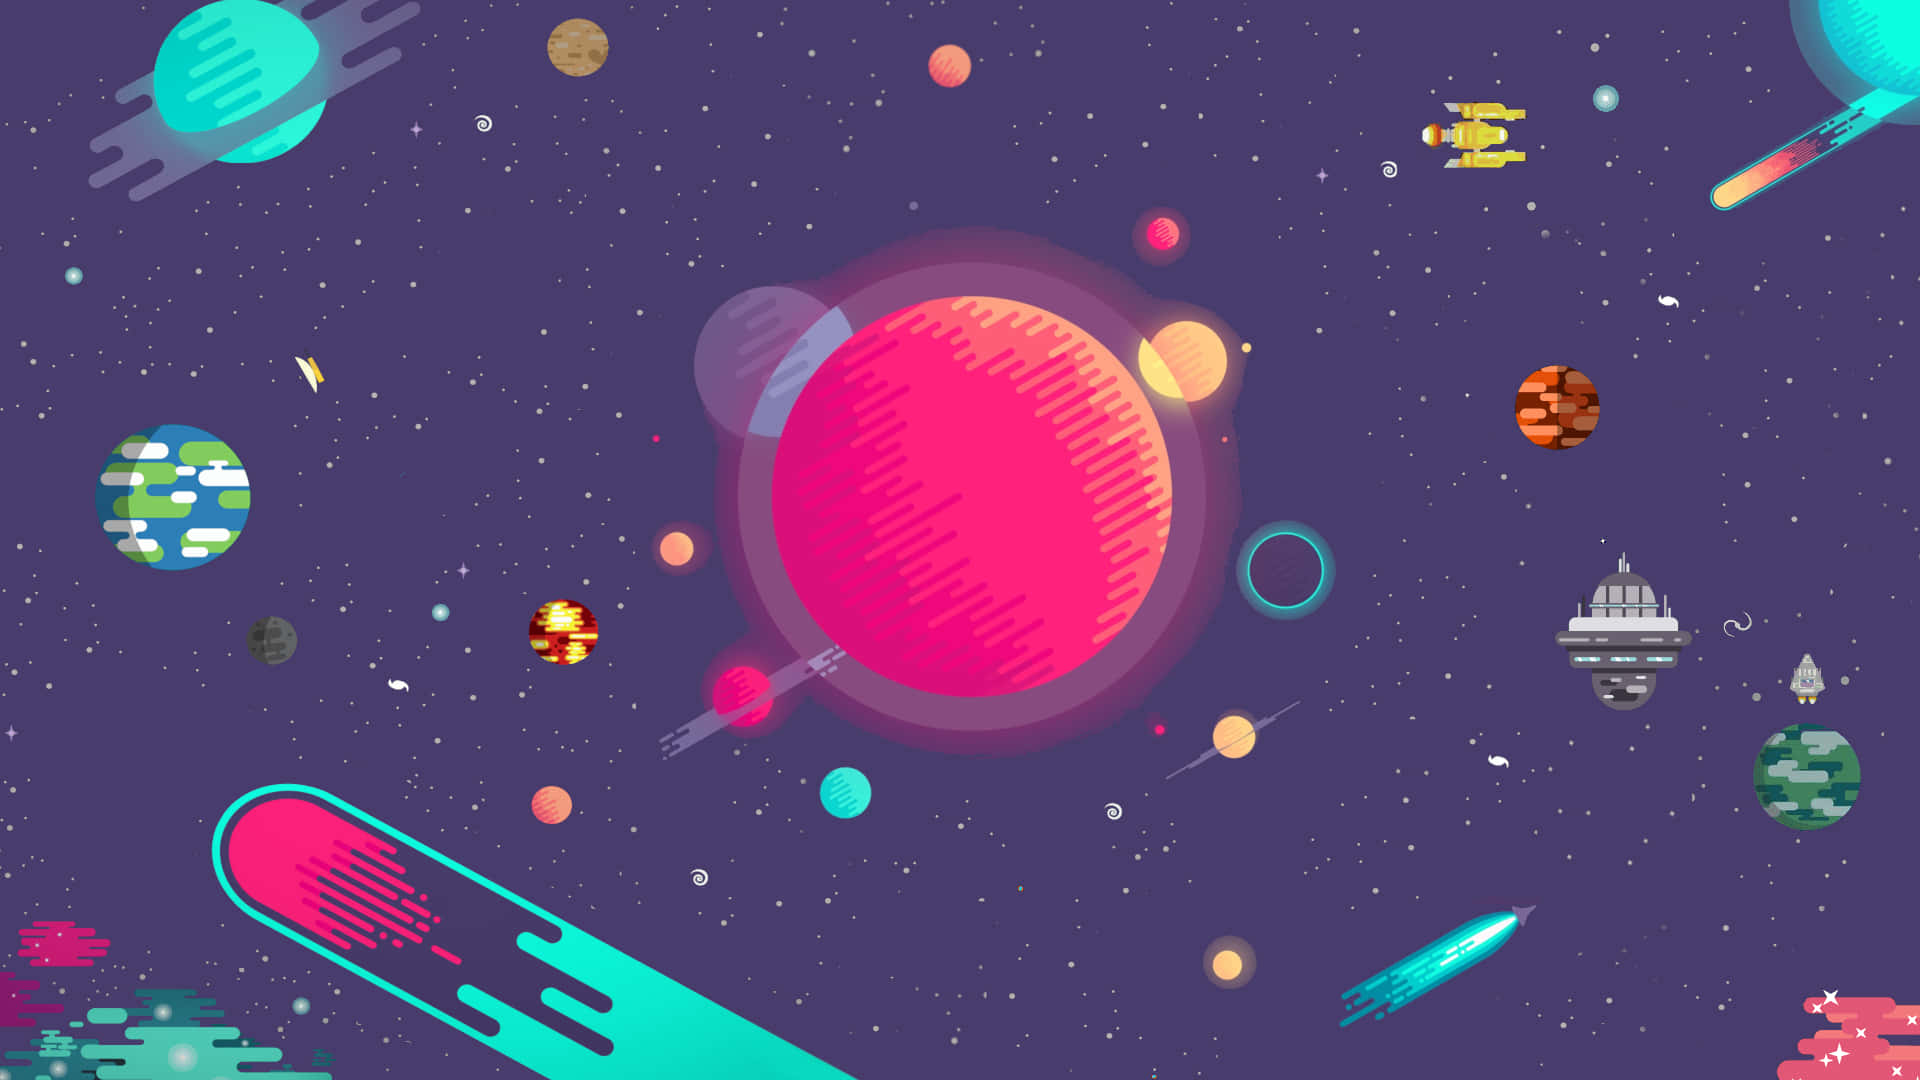 A Colorful Space Scene With Many Planets And Stars